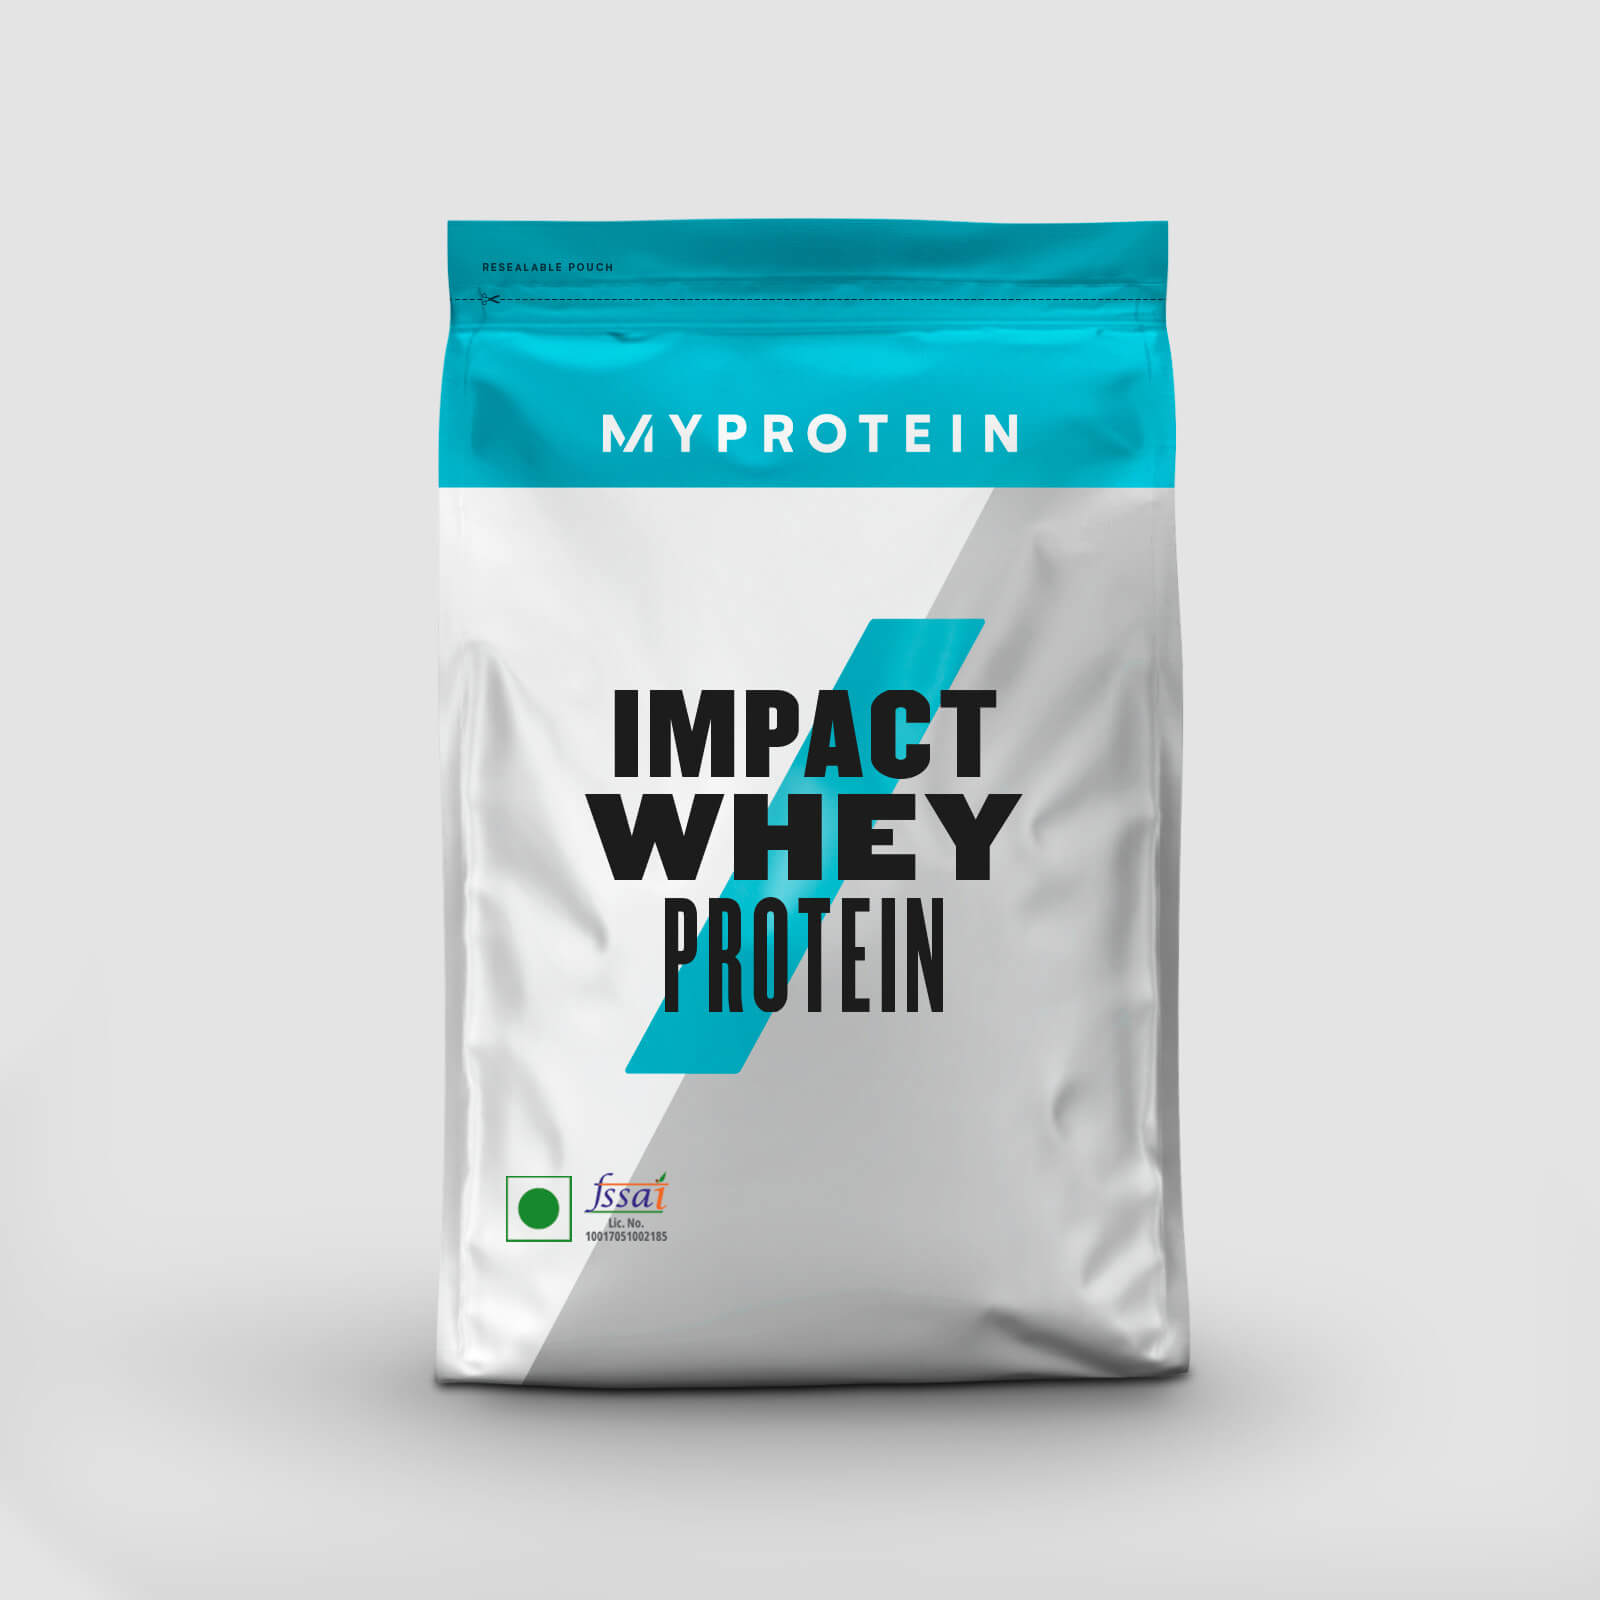 Impact Whey Protein - 1kg - Cookies and Cream